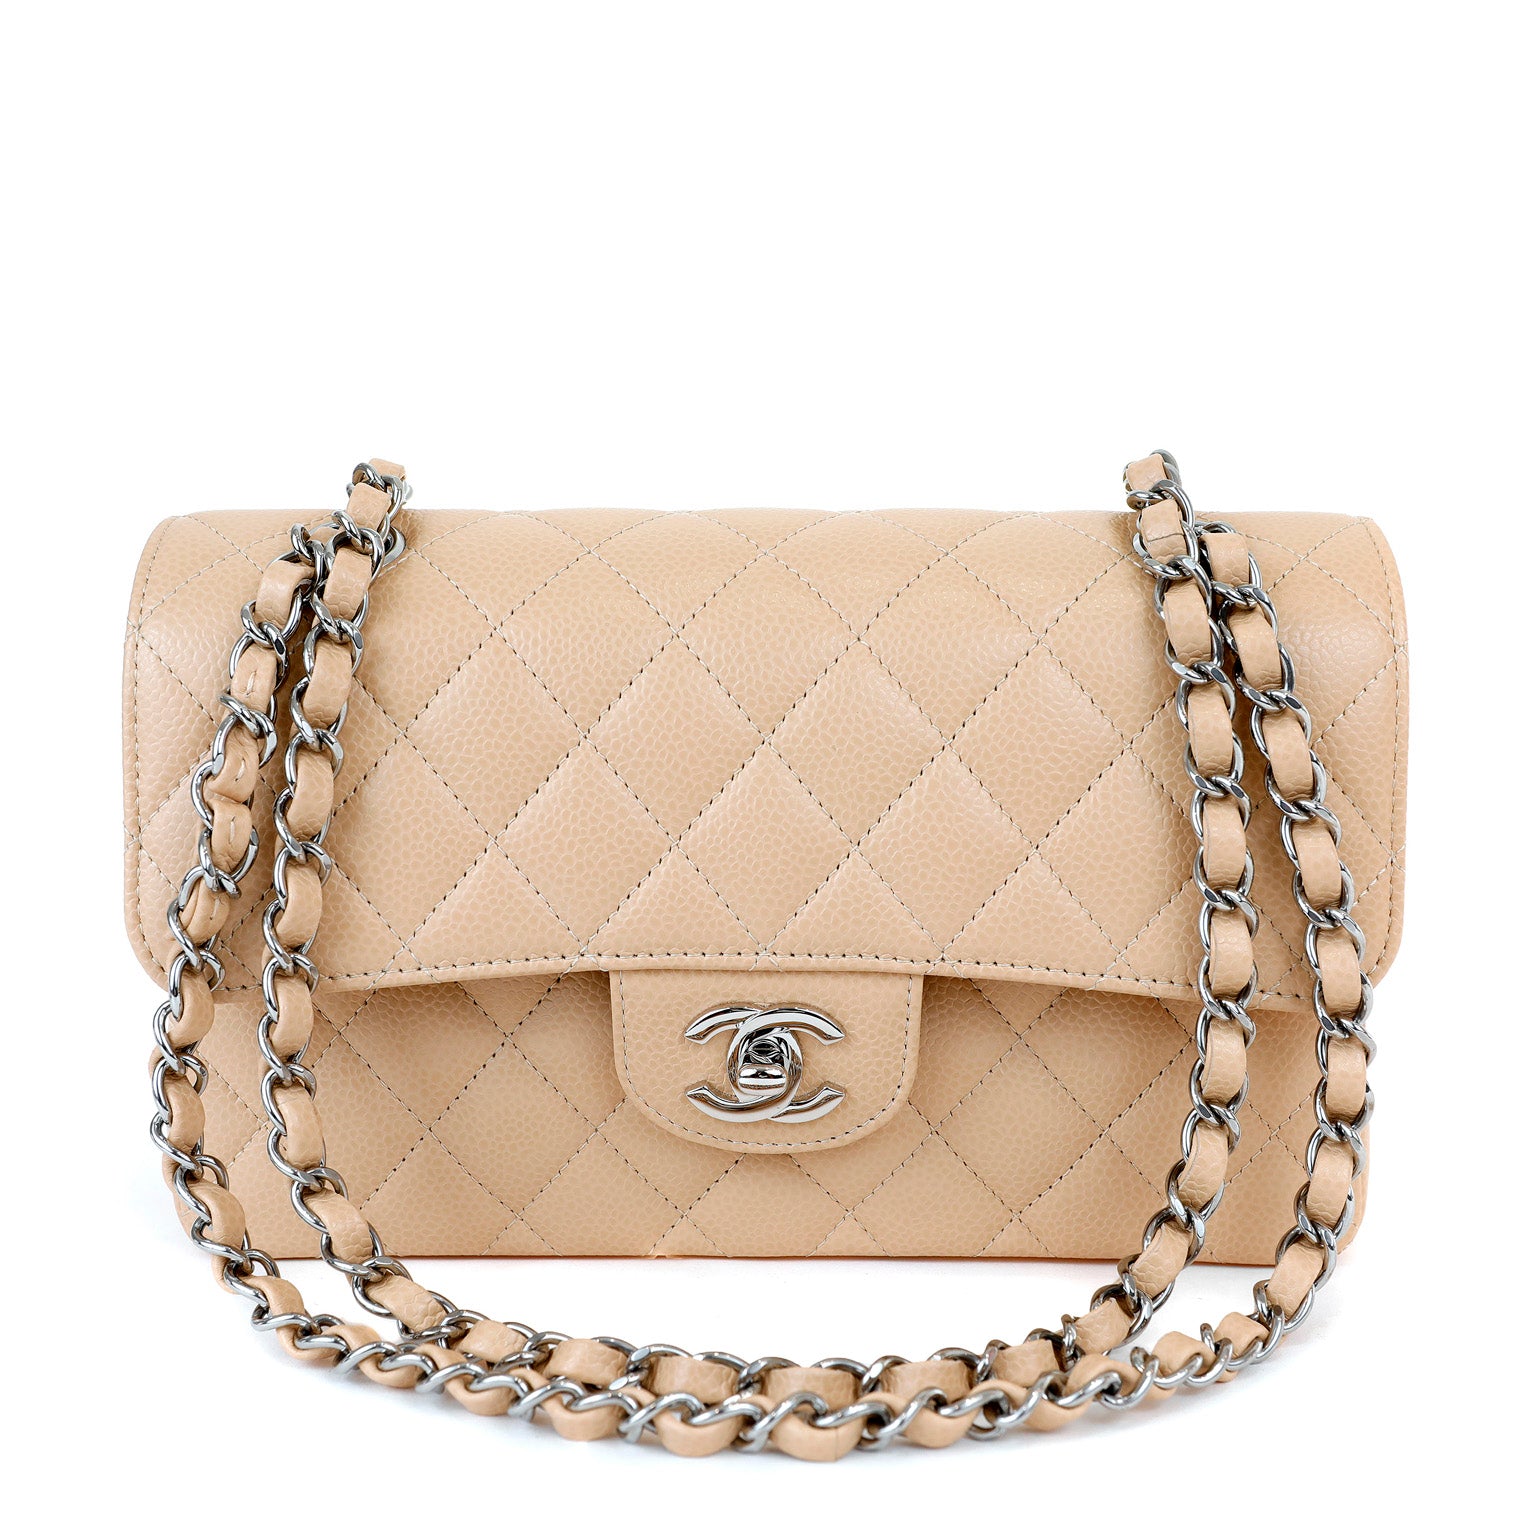 This Chanel classic flap bag is a timeless accessory that will